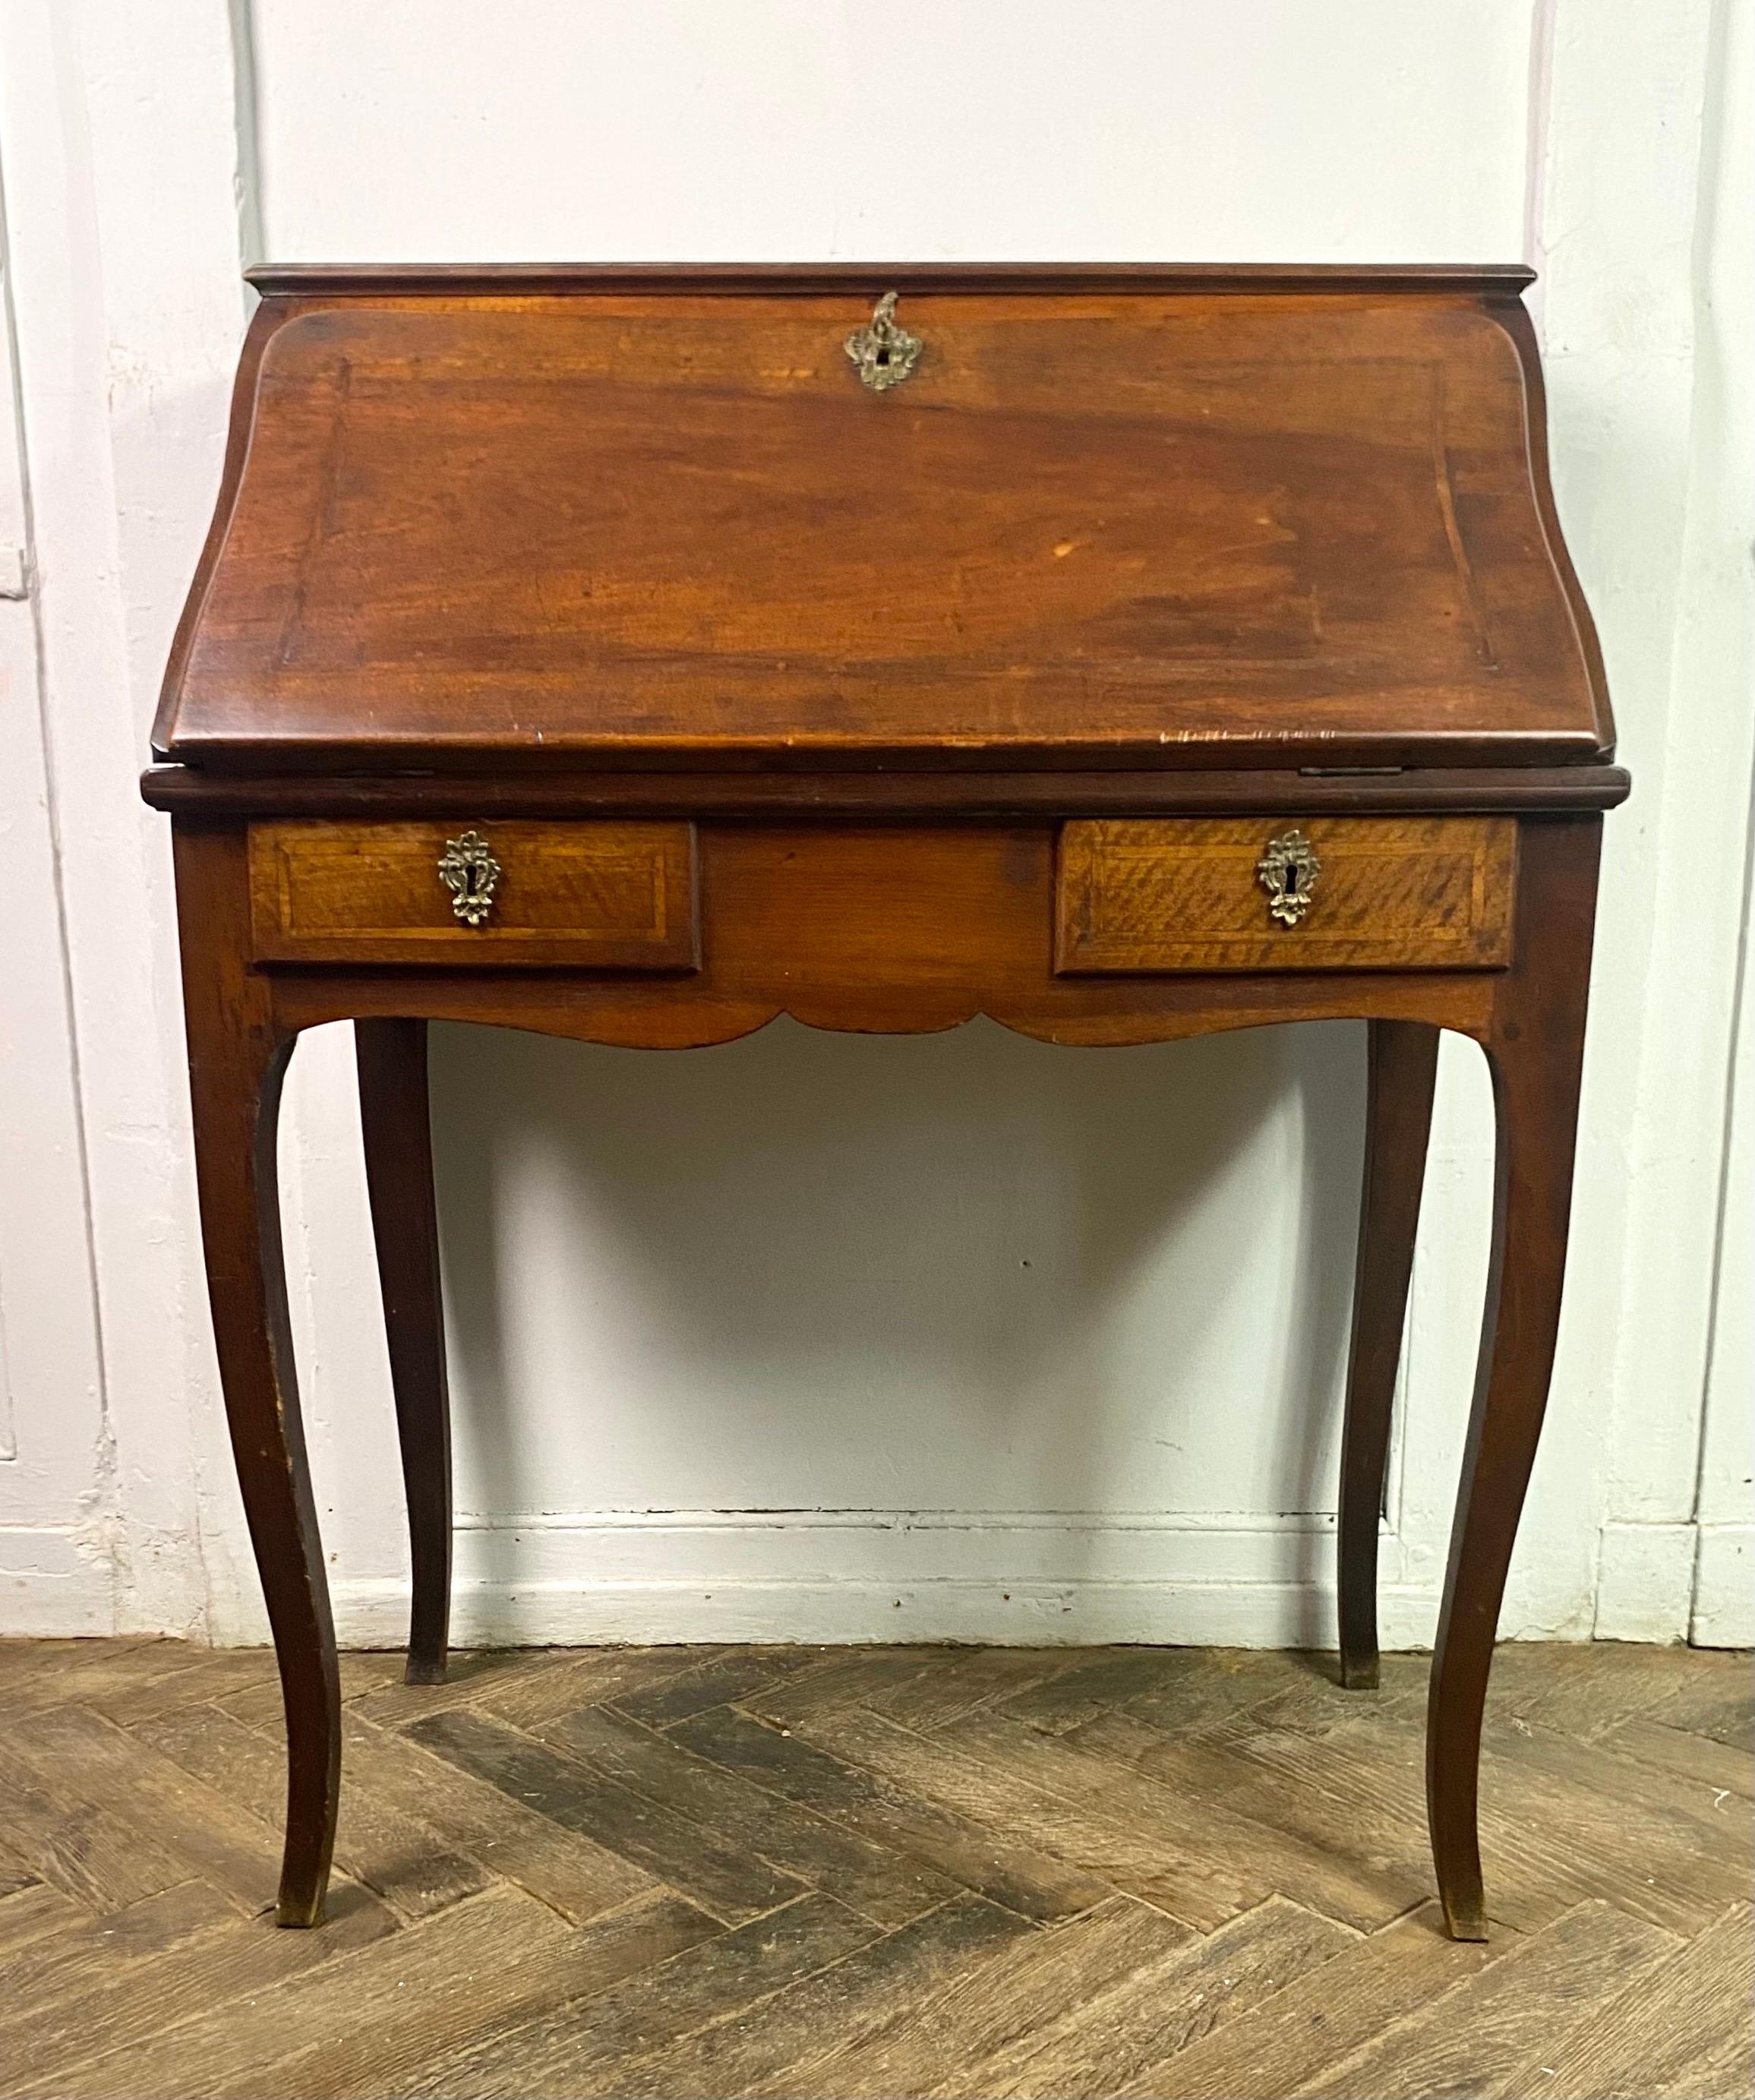 Magnificent donkey back desk, sloping desk from the Louis XV period from the 18th century. It opens with a flap which reveals 4 interior drawers, 1 shelf and 2 lockers as well as a small secret compartment on the double bottom.
This pretty desk